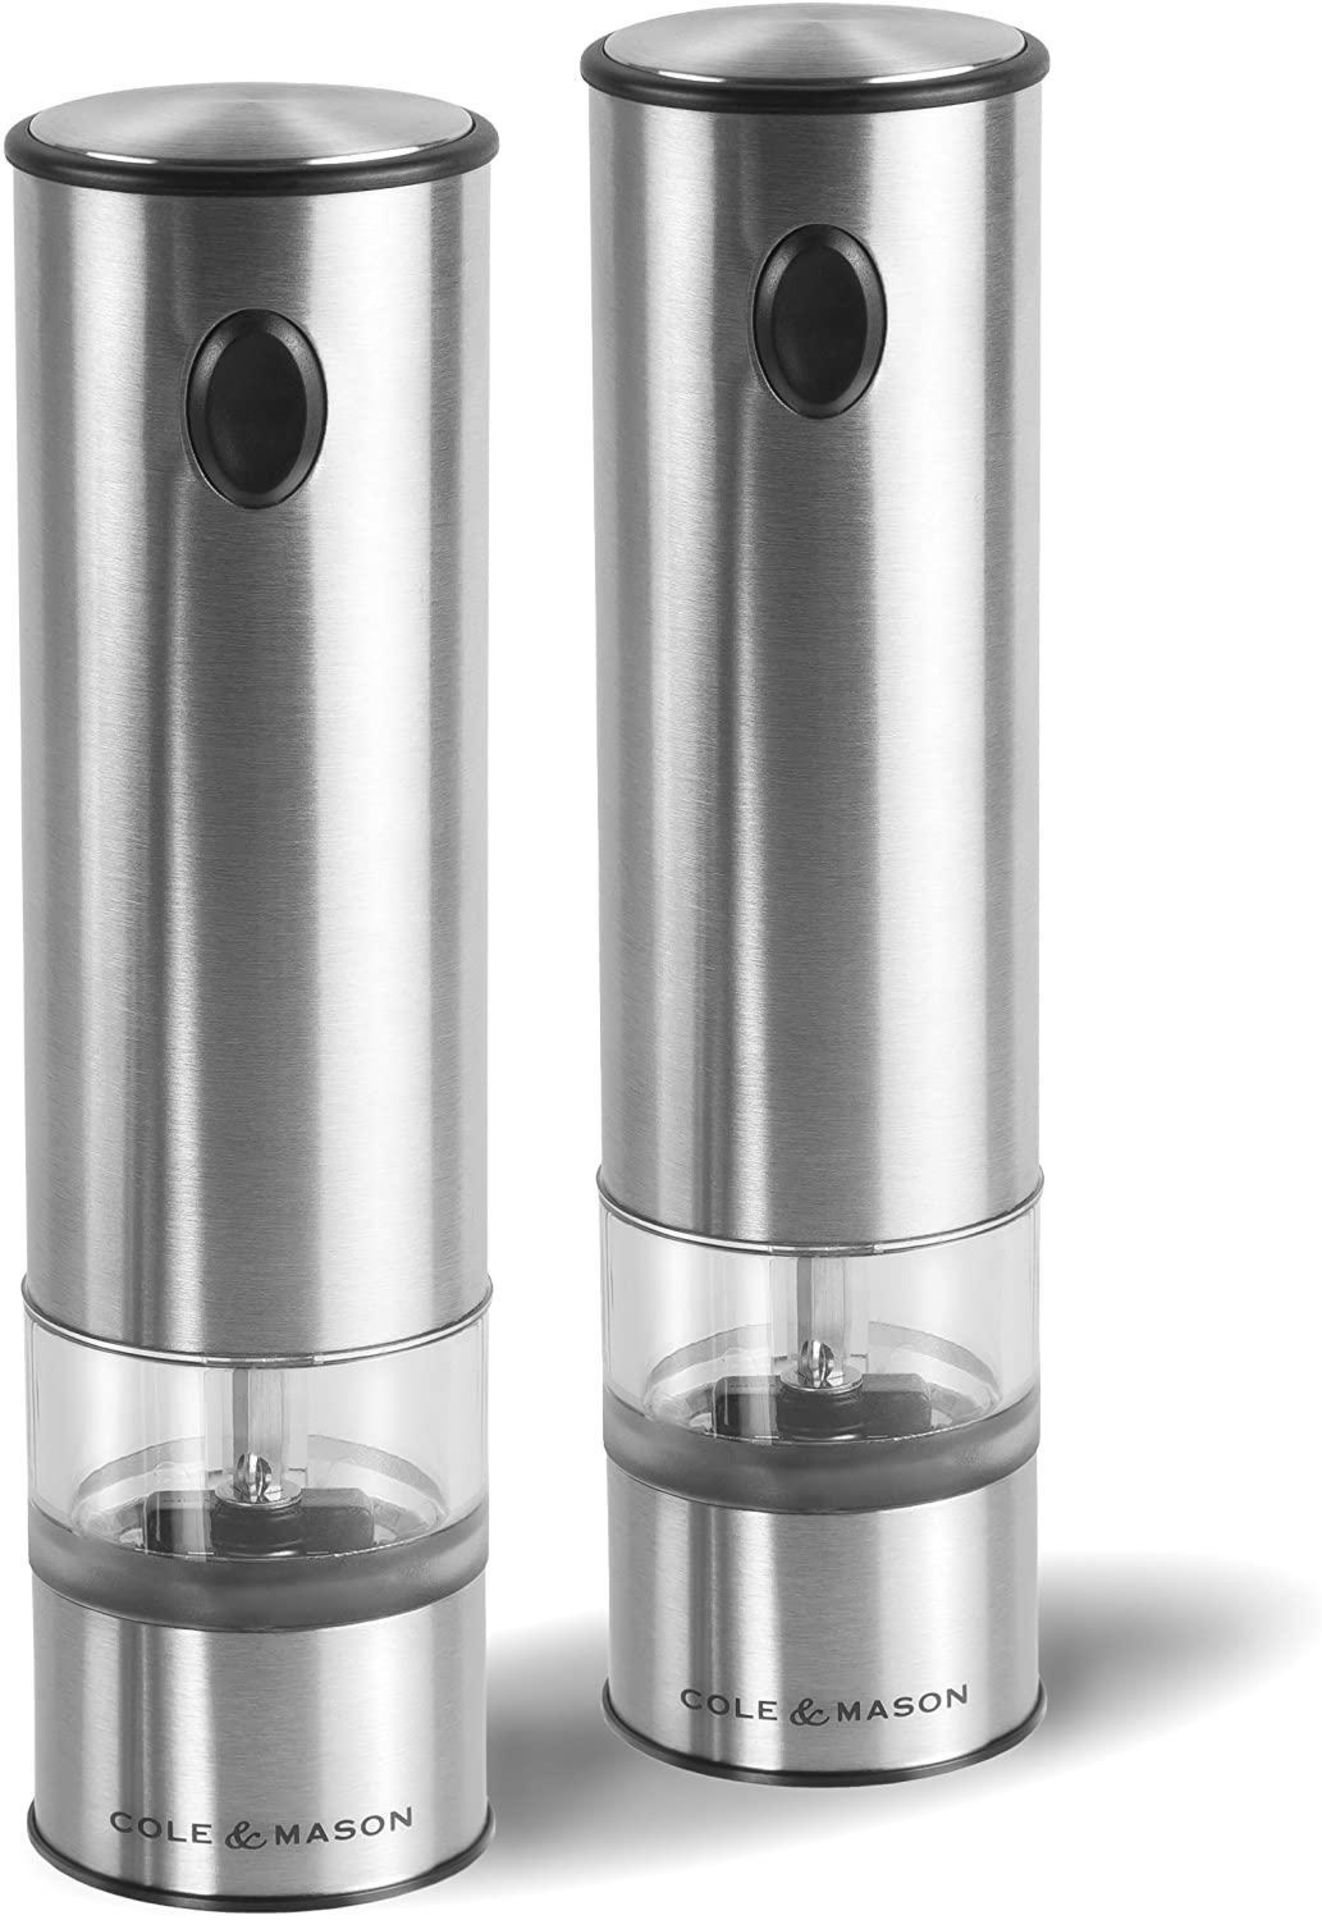 Cole and Mason Electronic Salt and Pepper Mill Gift Set, Stainless Steel/Metallic £31.99 RRP